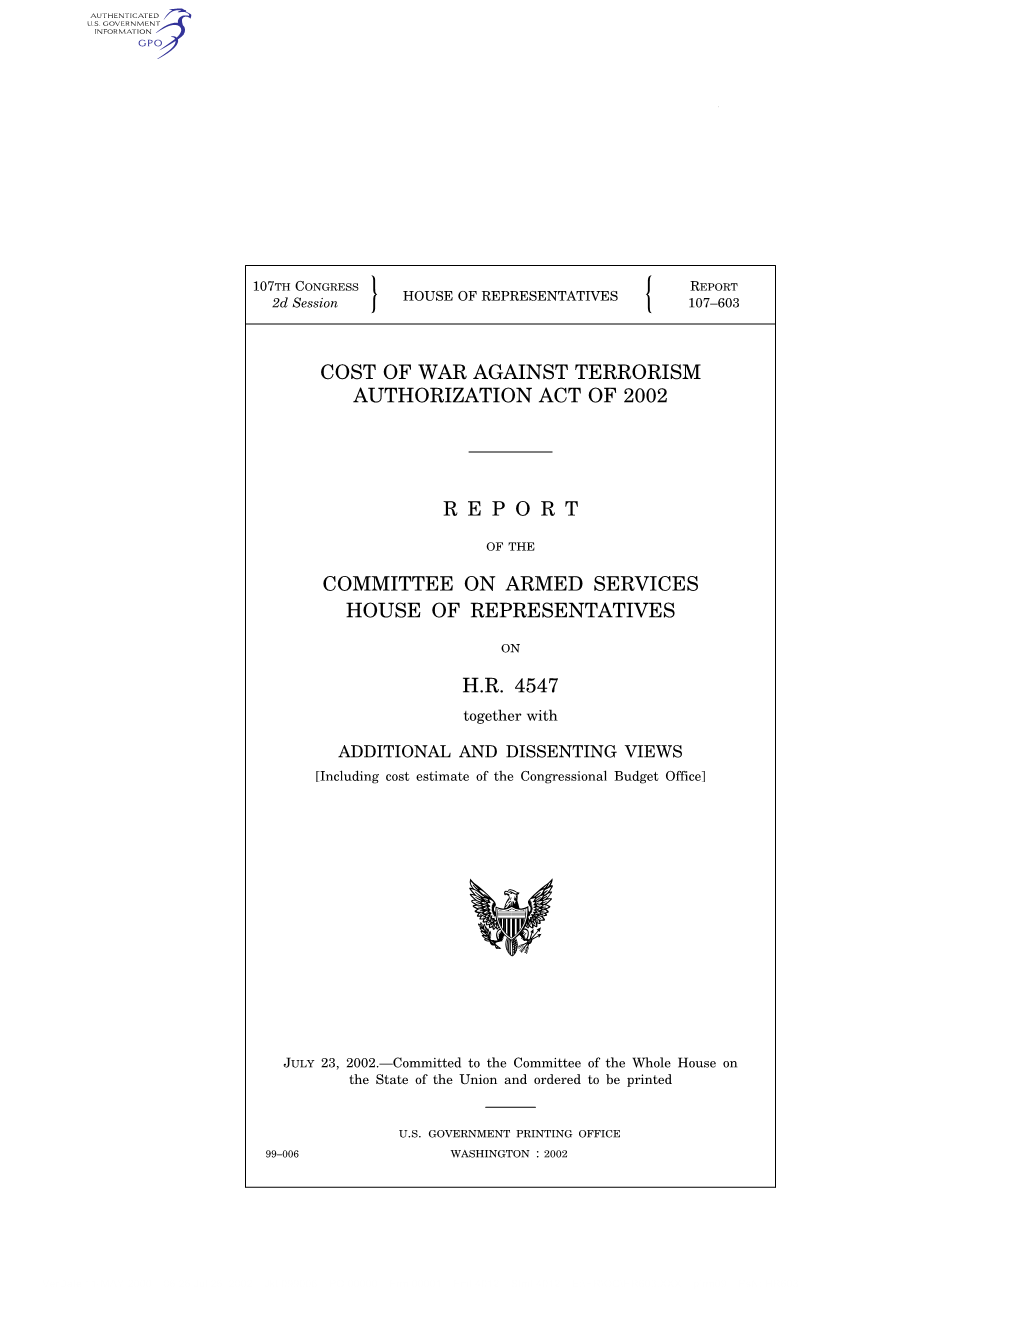 Cost of War Against Terrorism Authorization Act of 2002